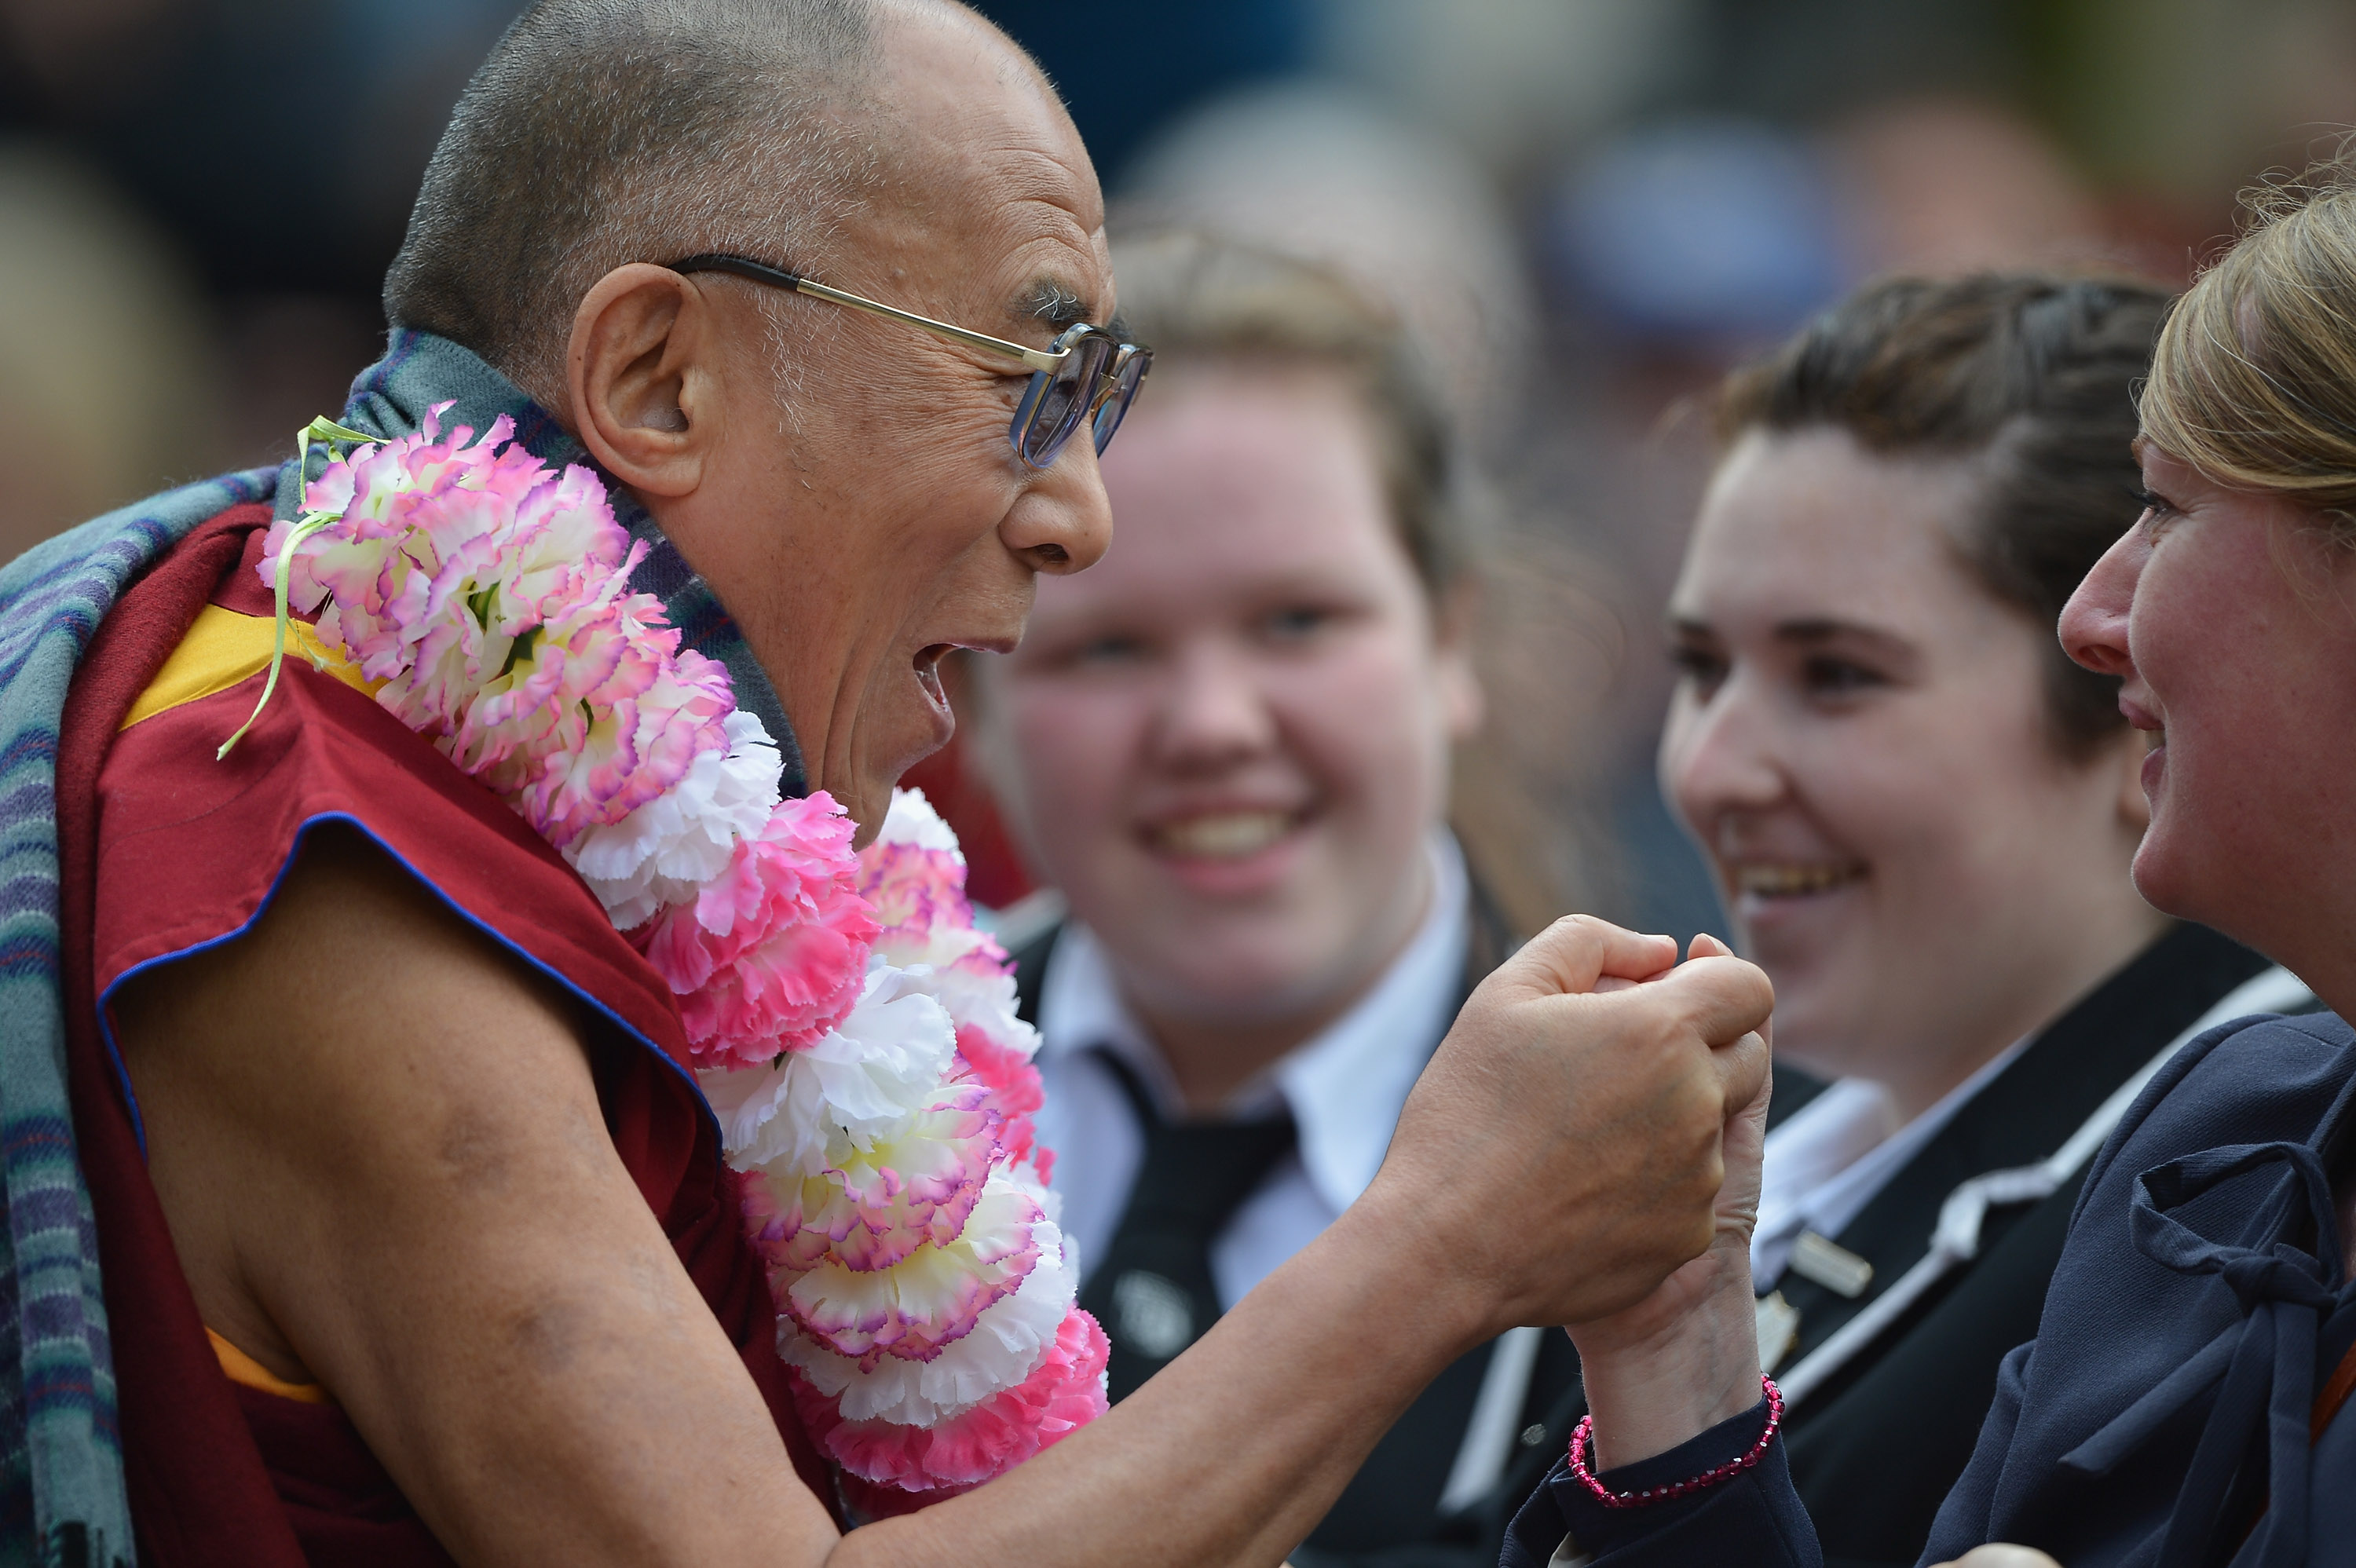 The Dalai Lama is totally fine with gay marriage